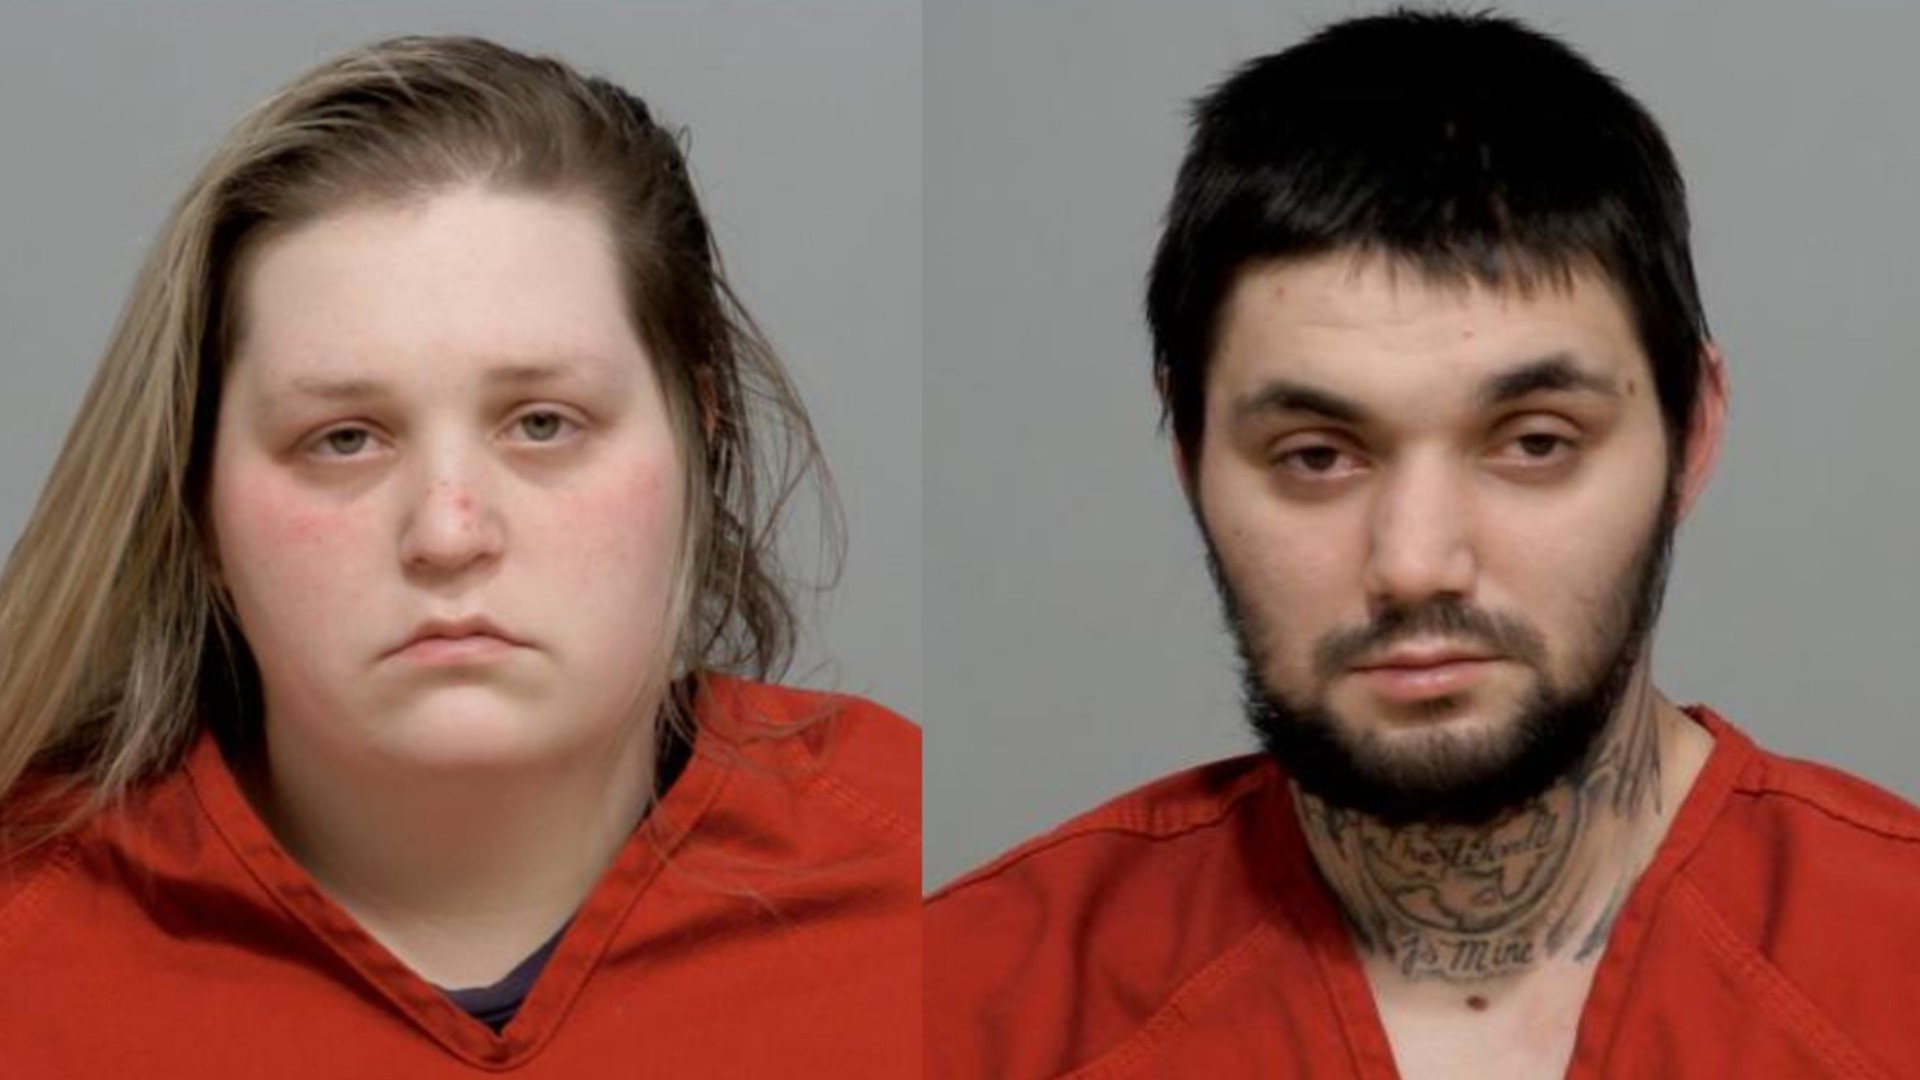 Nicholas Lee and Brianna Roush have both been sentenced to prison for the death of their 1-year-old son who overdosed on fentanyl.